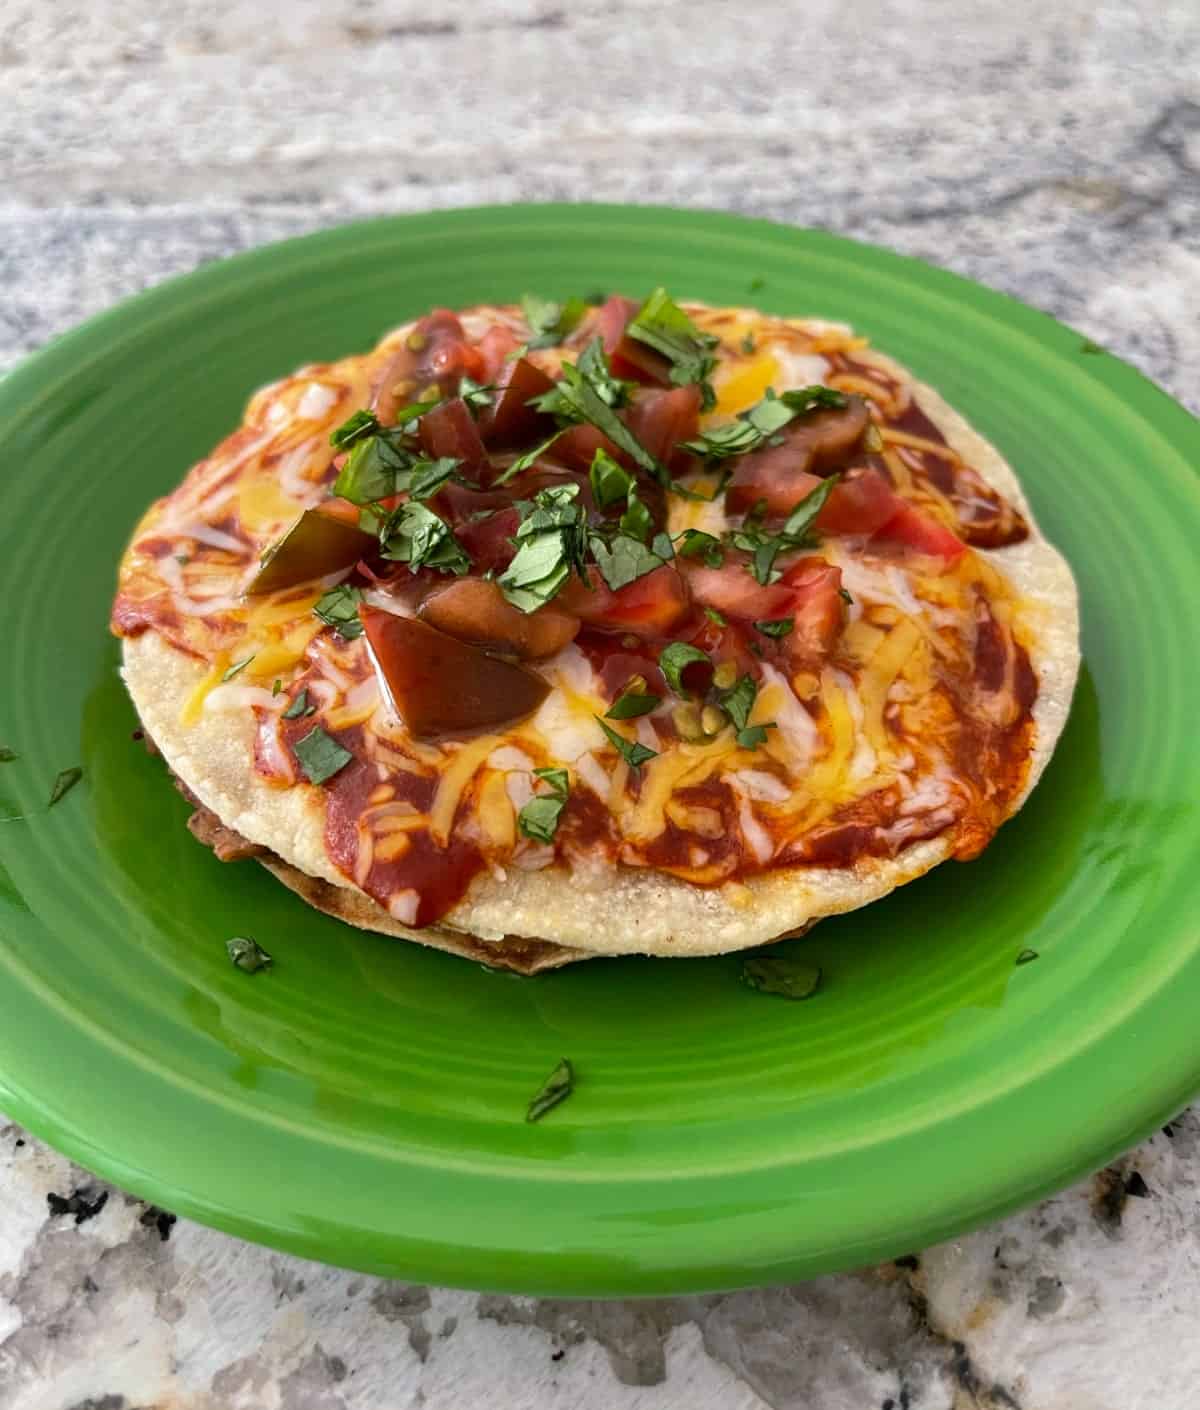 Homemade Mexican Pizza topped with chopped cilantro on green plate.